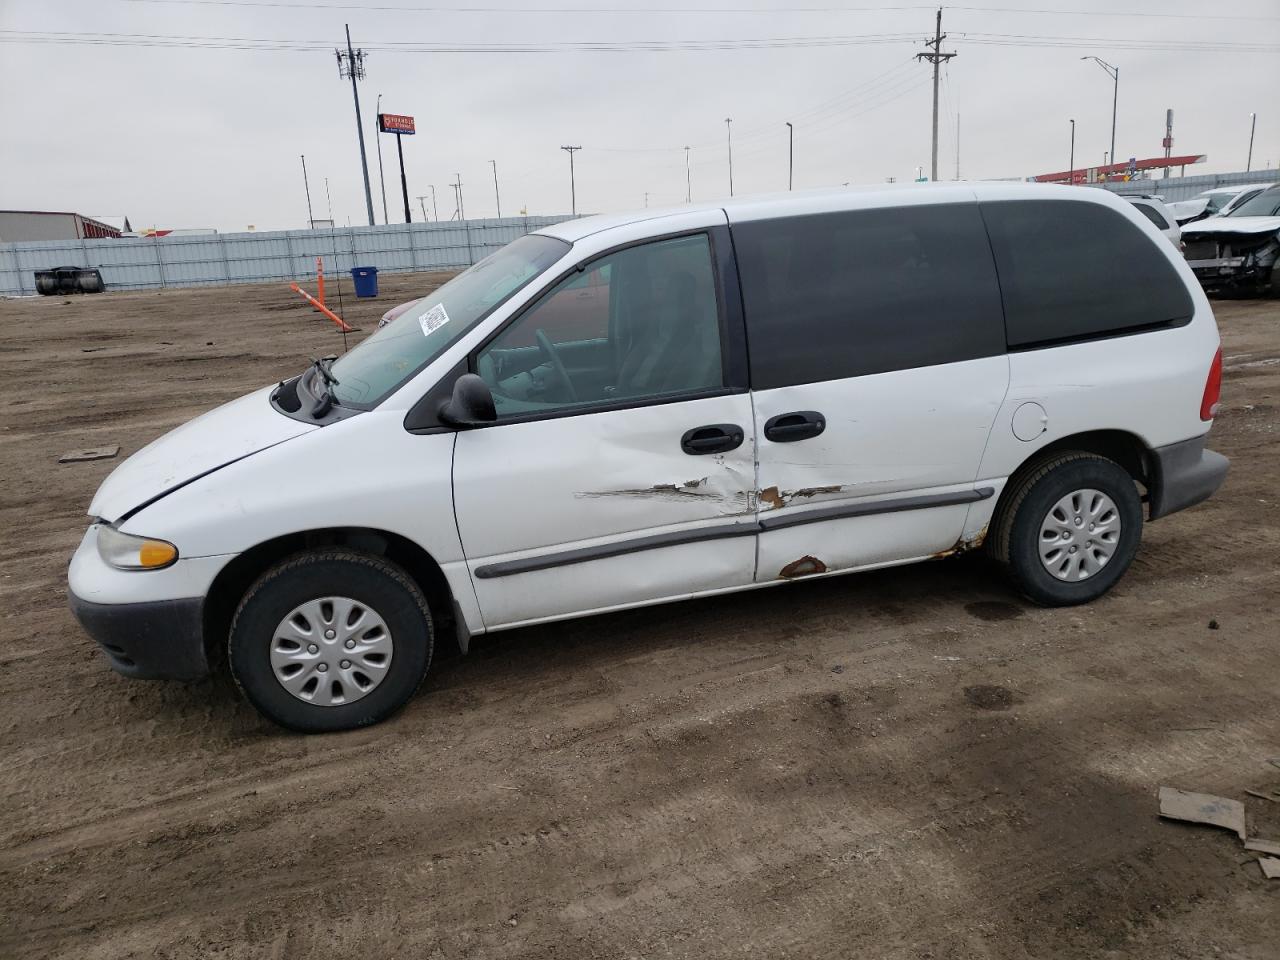 1998 Plymouth Voyager for sale at Copart Greenwood, NE. Lot #41948*** |  SalvageAutosAuction.com